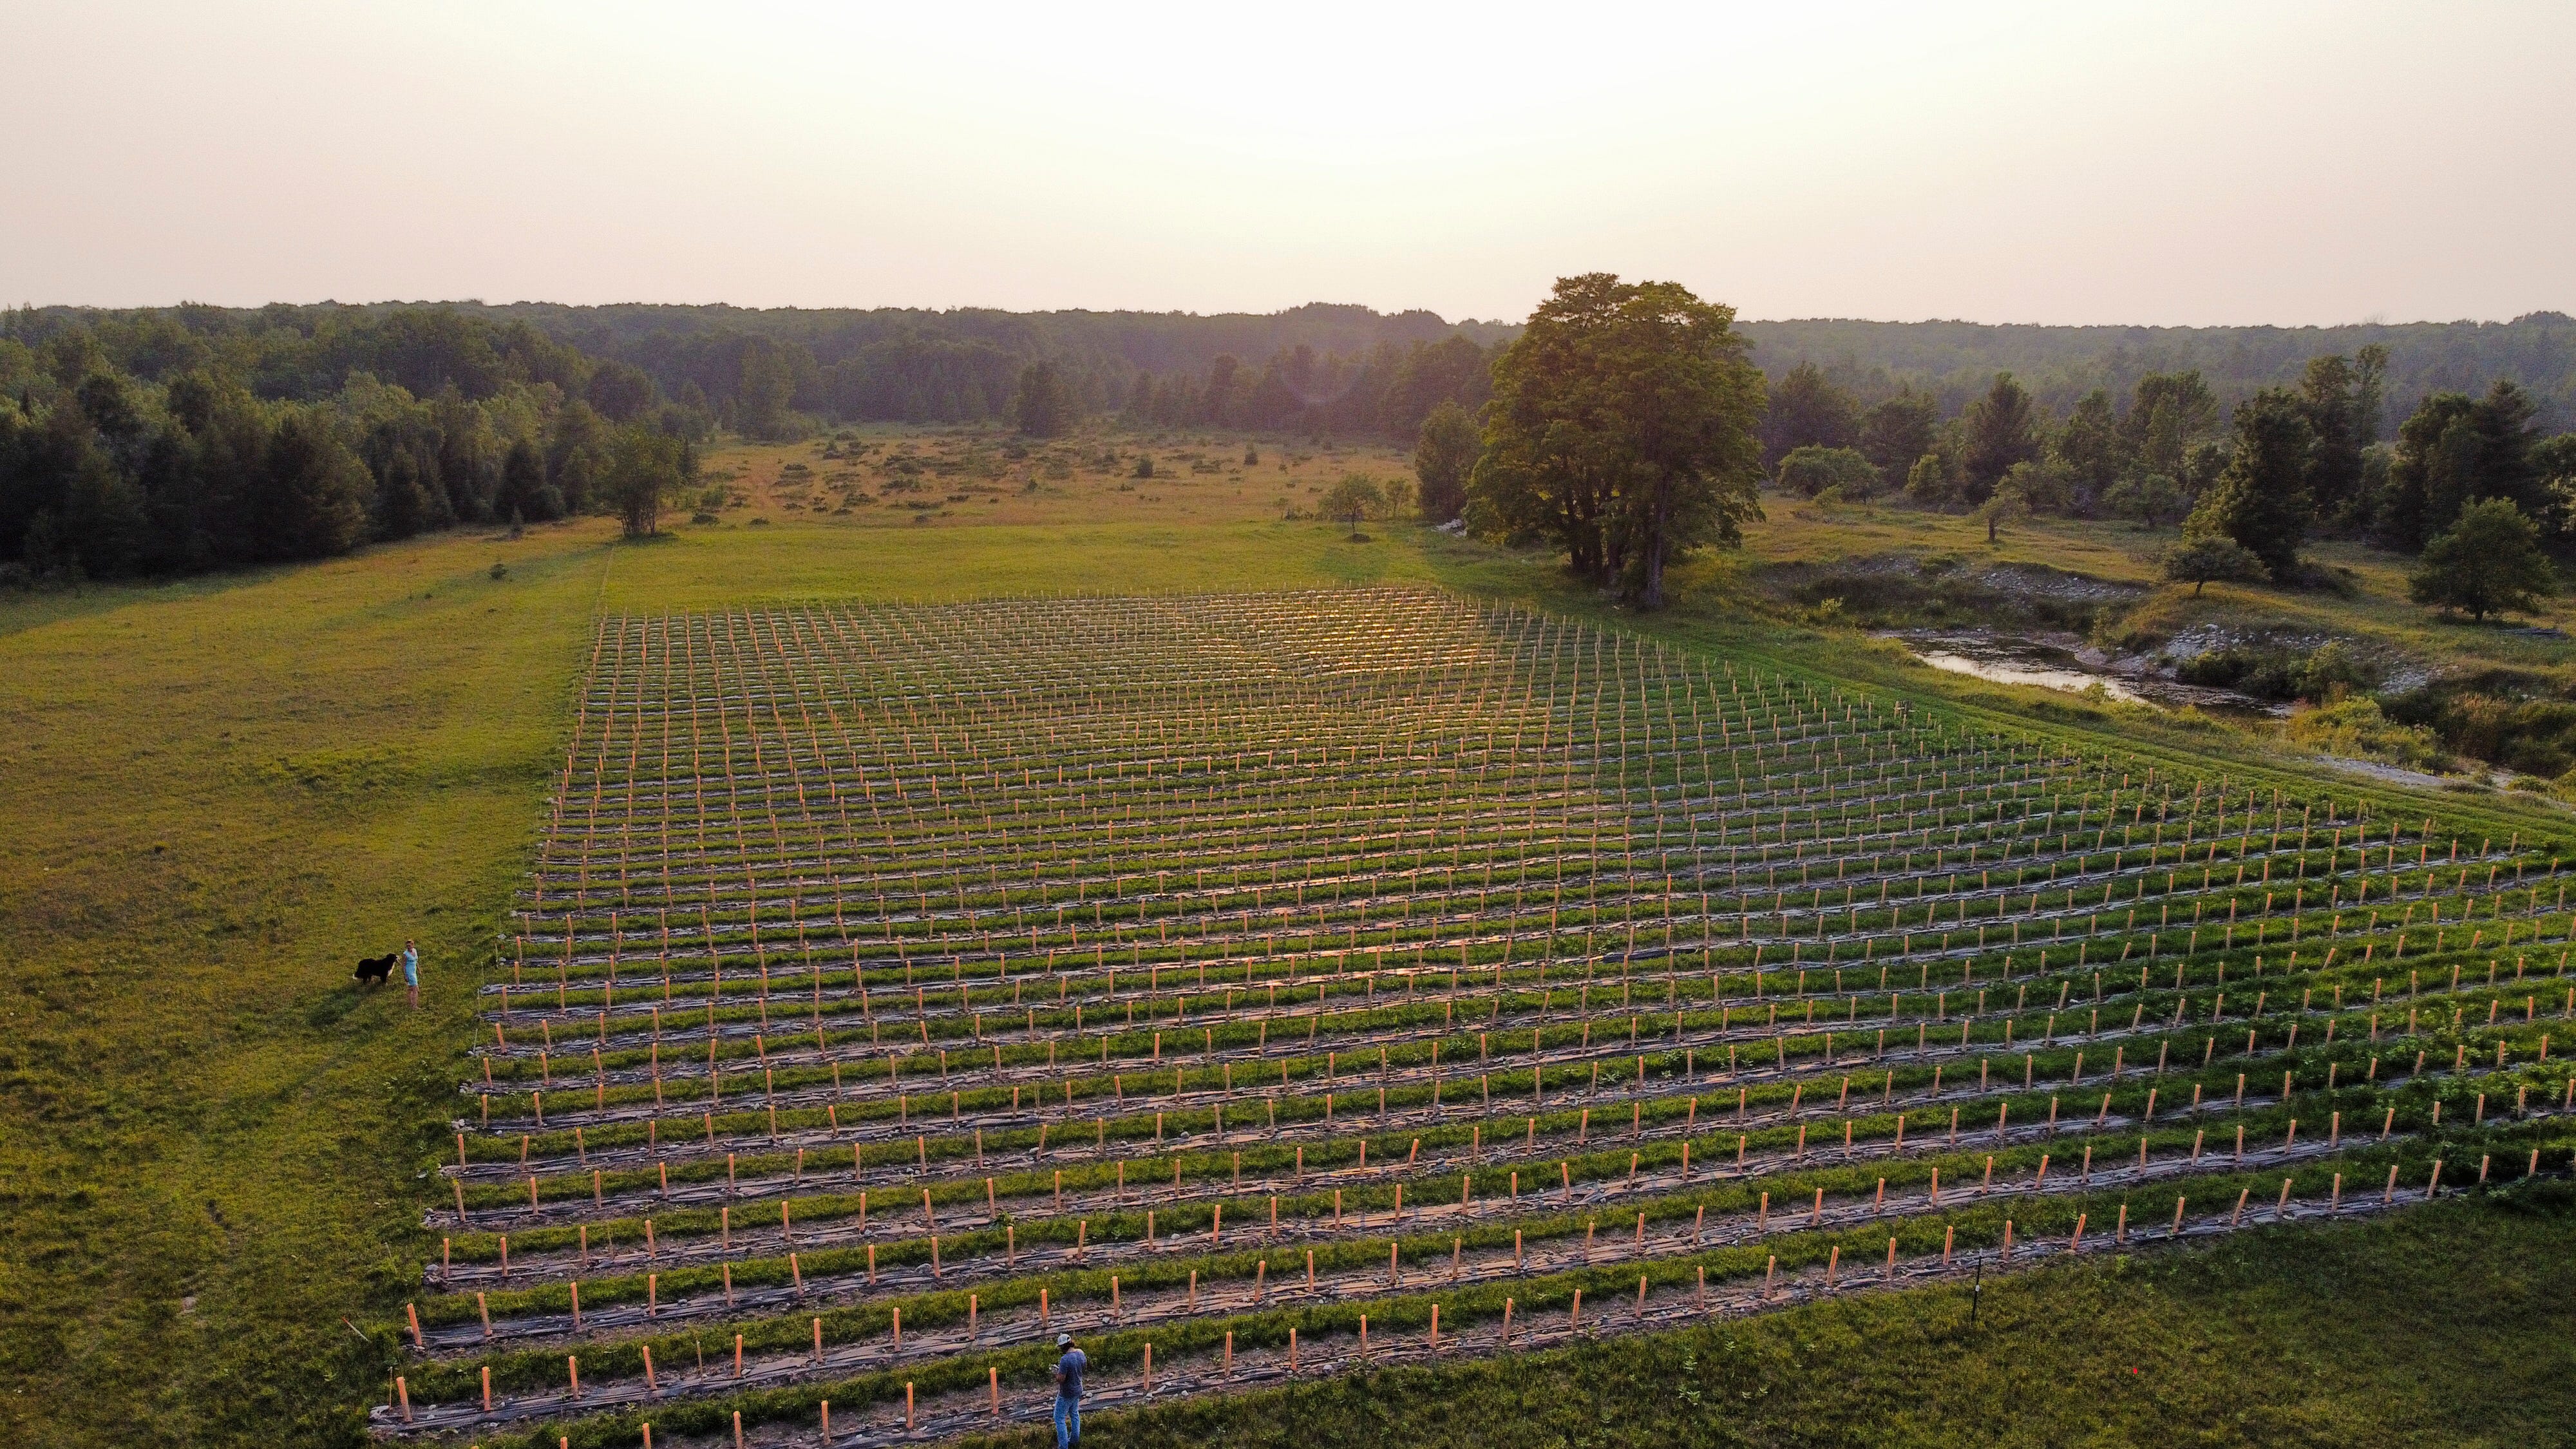 Adam and Kate test planted 13 varietals of wine grapes on Beaver Island, 32 miles out from the Michigan mainland in Lake Michigan.